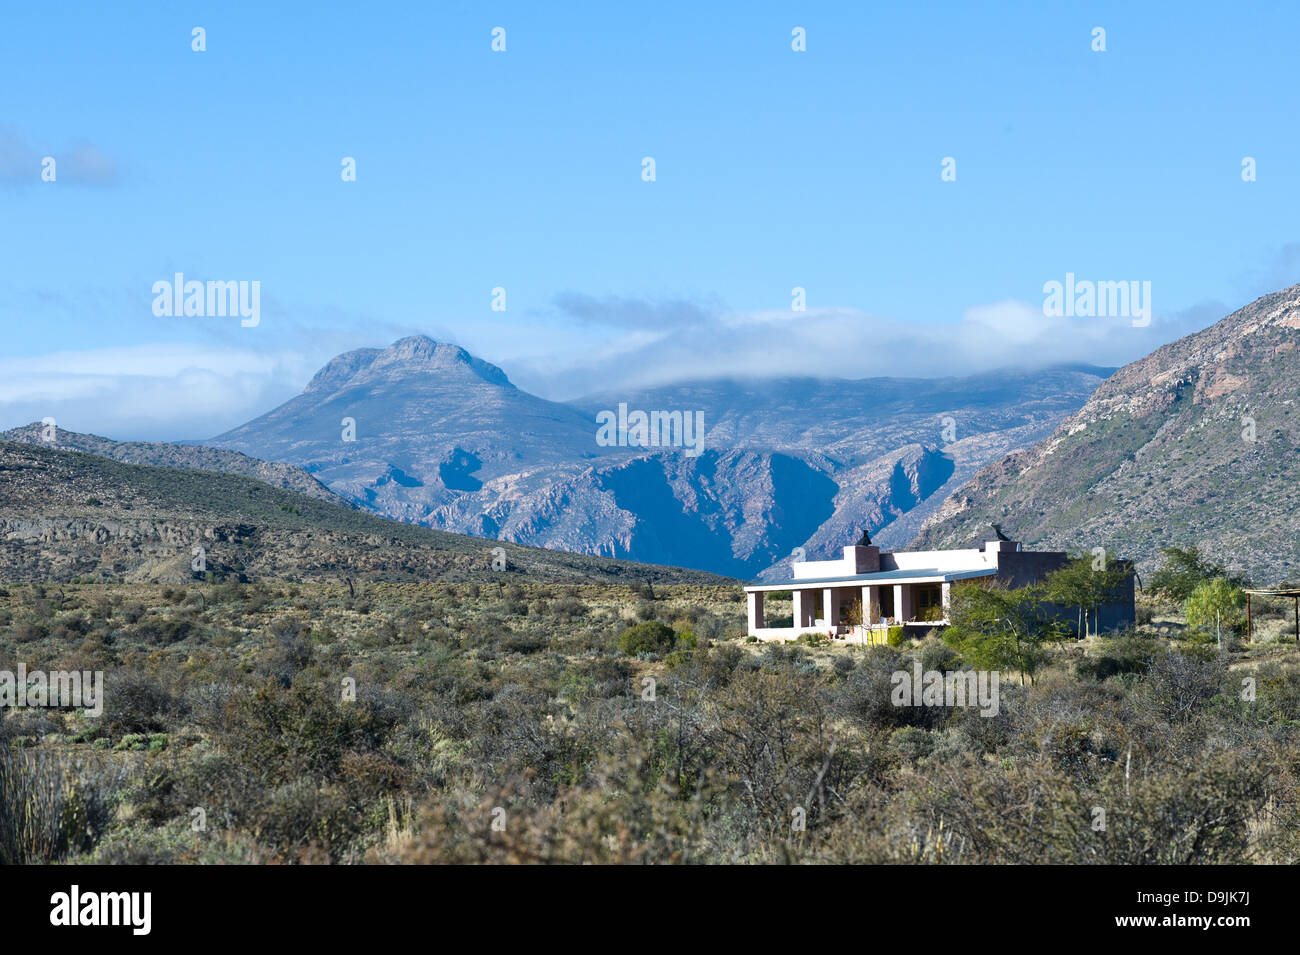 Karoo vegetation, mountains and house, Prince Albert, Western Cape, South Africa Stock Photo